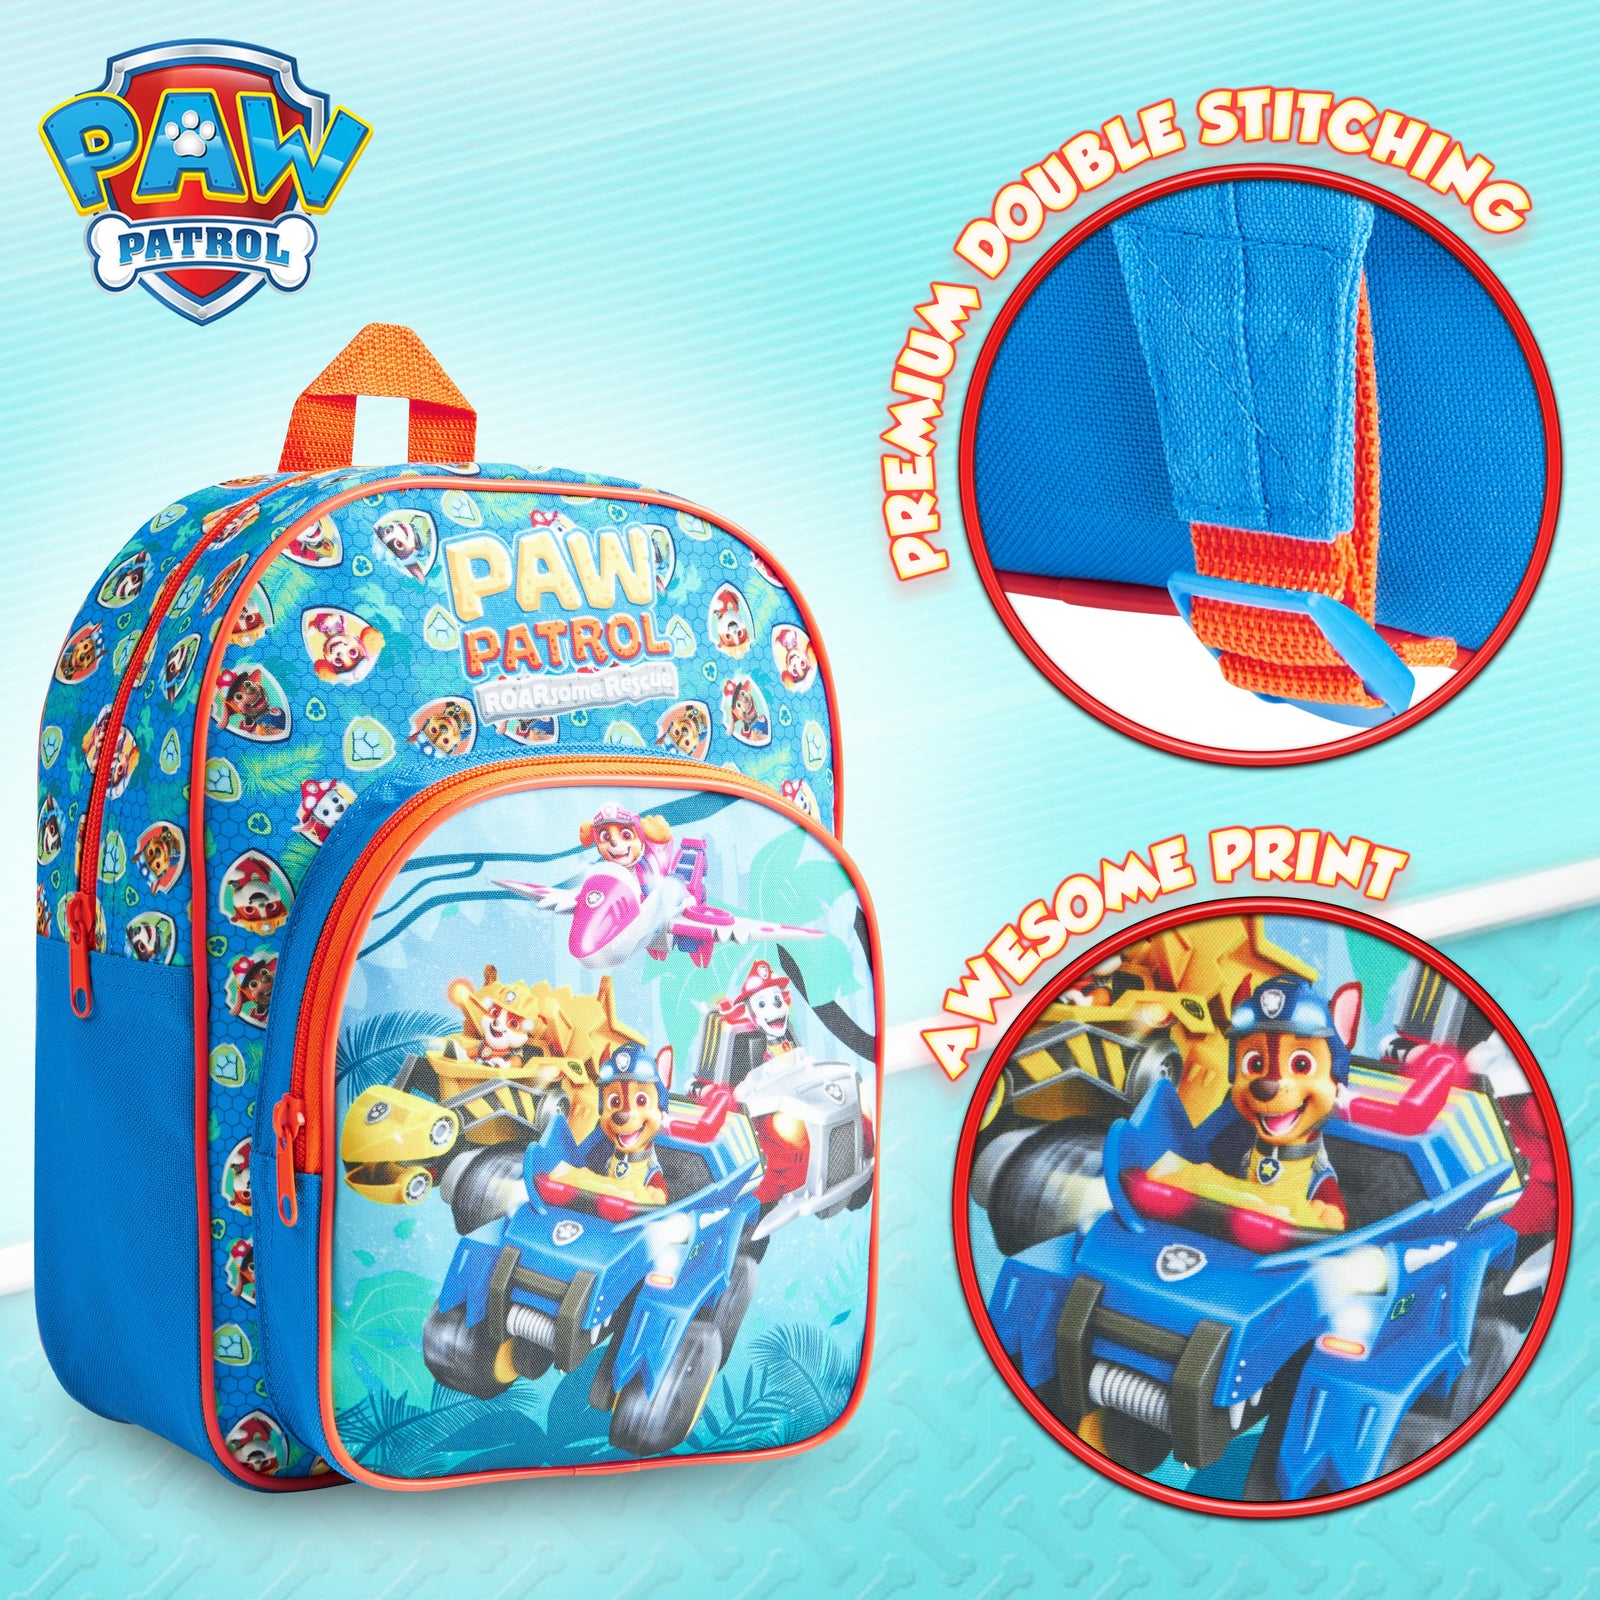 PAW Patrol School Bag, Children's Backpacks, Boys Backpack with the Mi